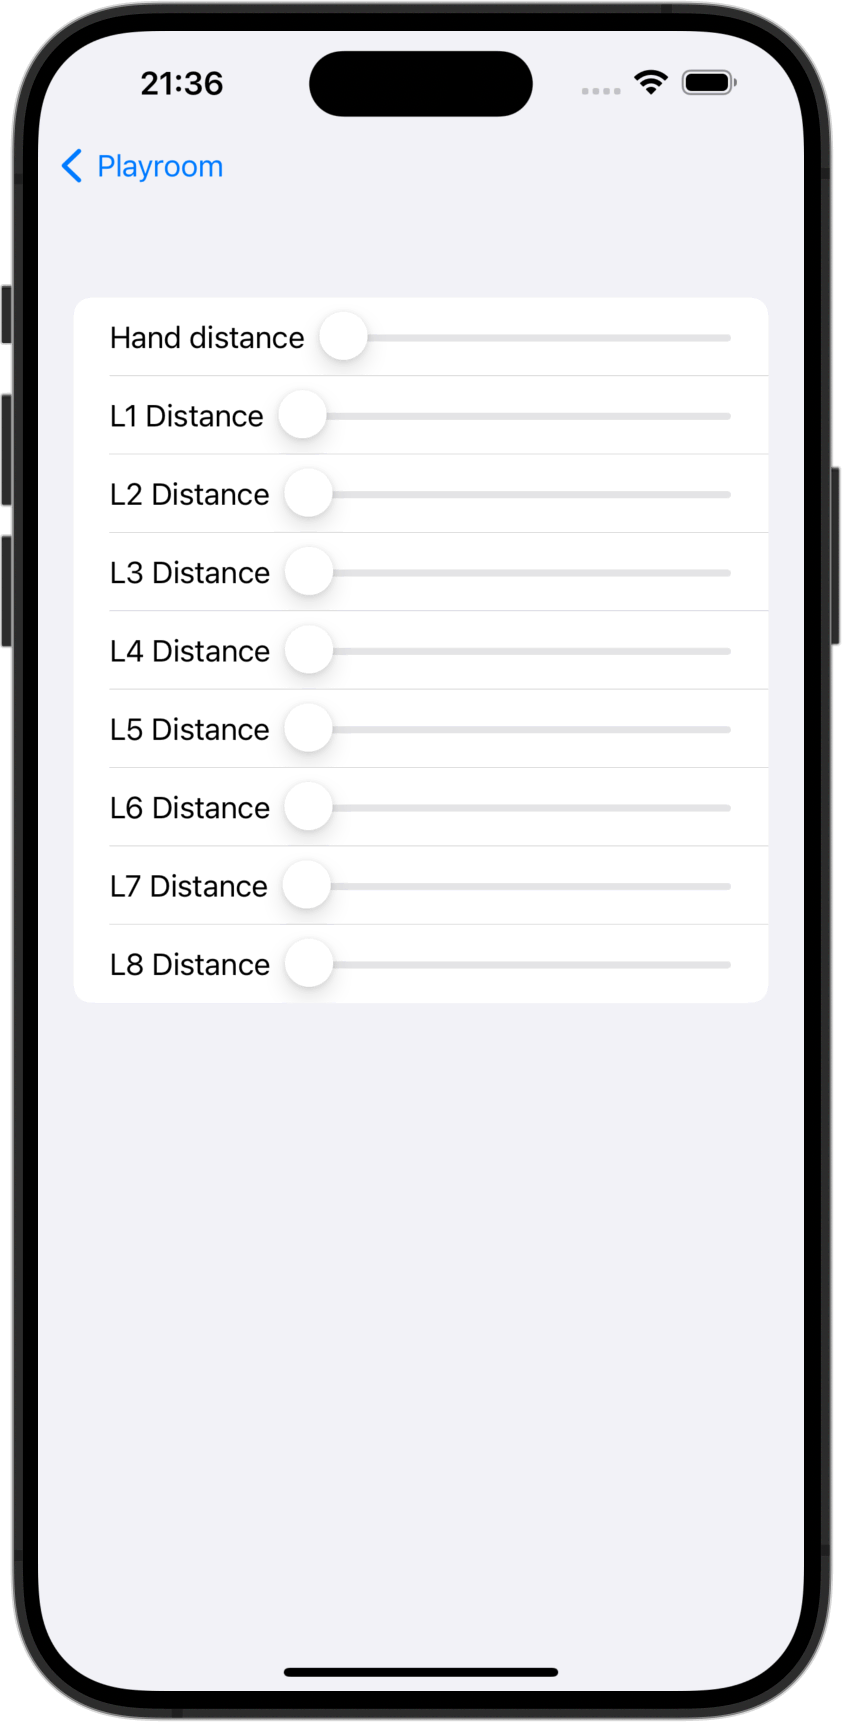 A long list of sliders marked L1 Distance, L2 Distance, etc.